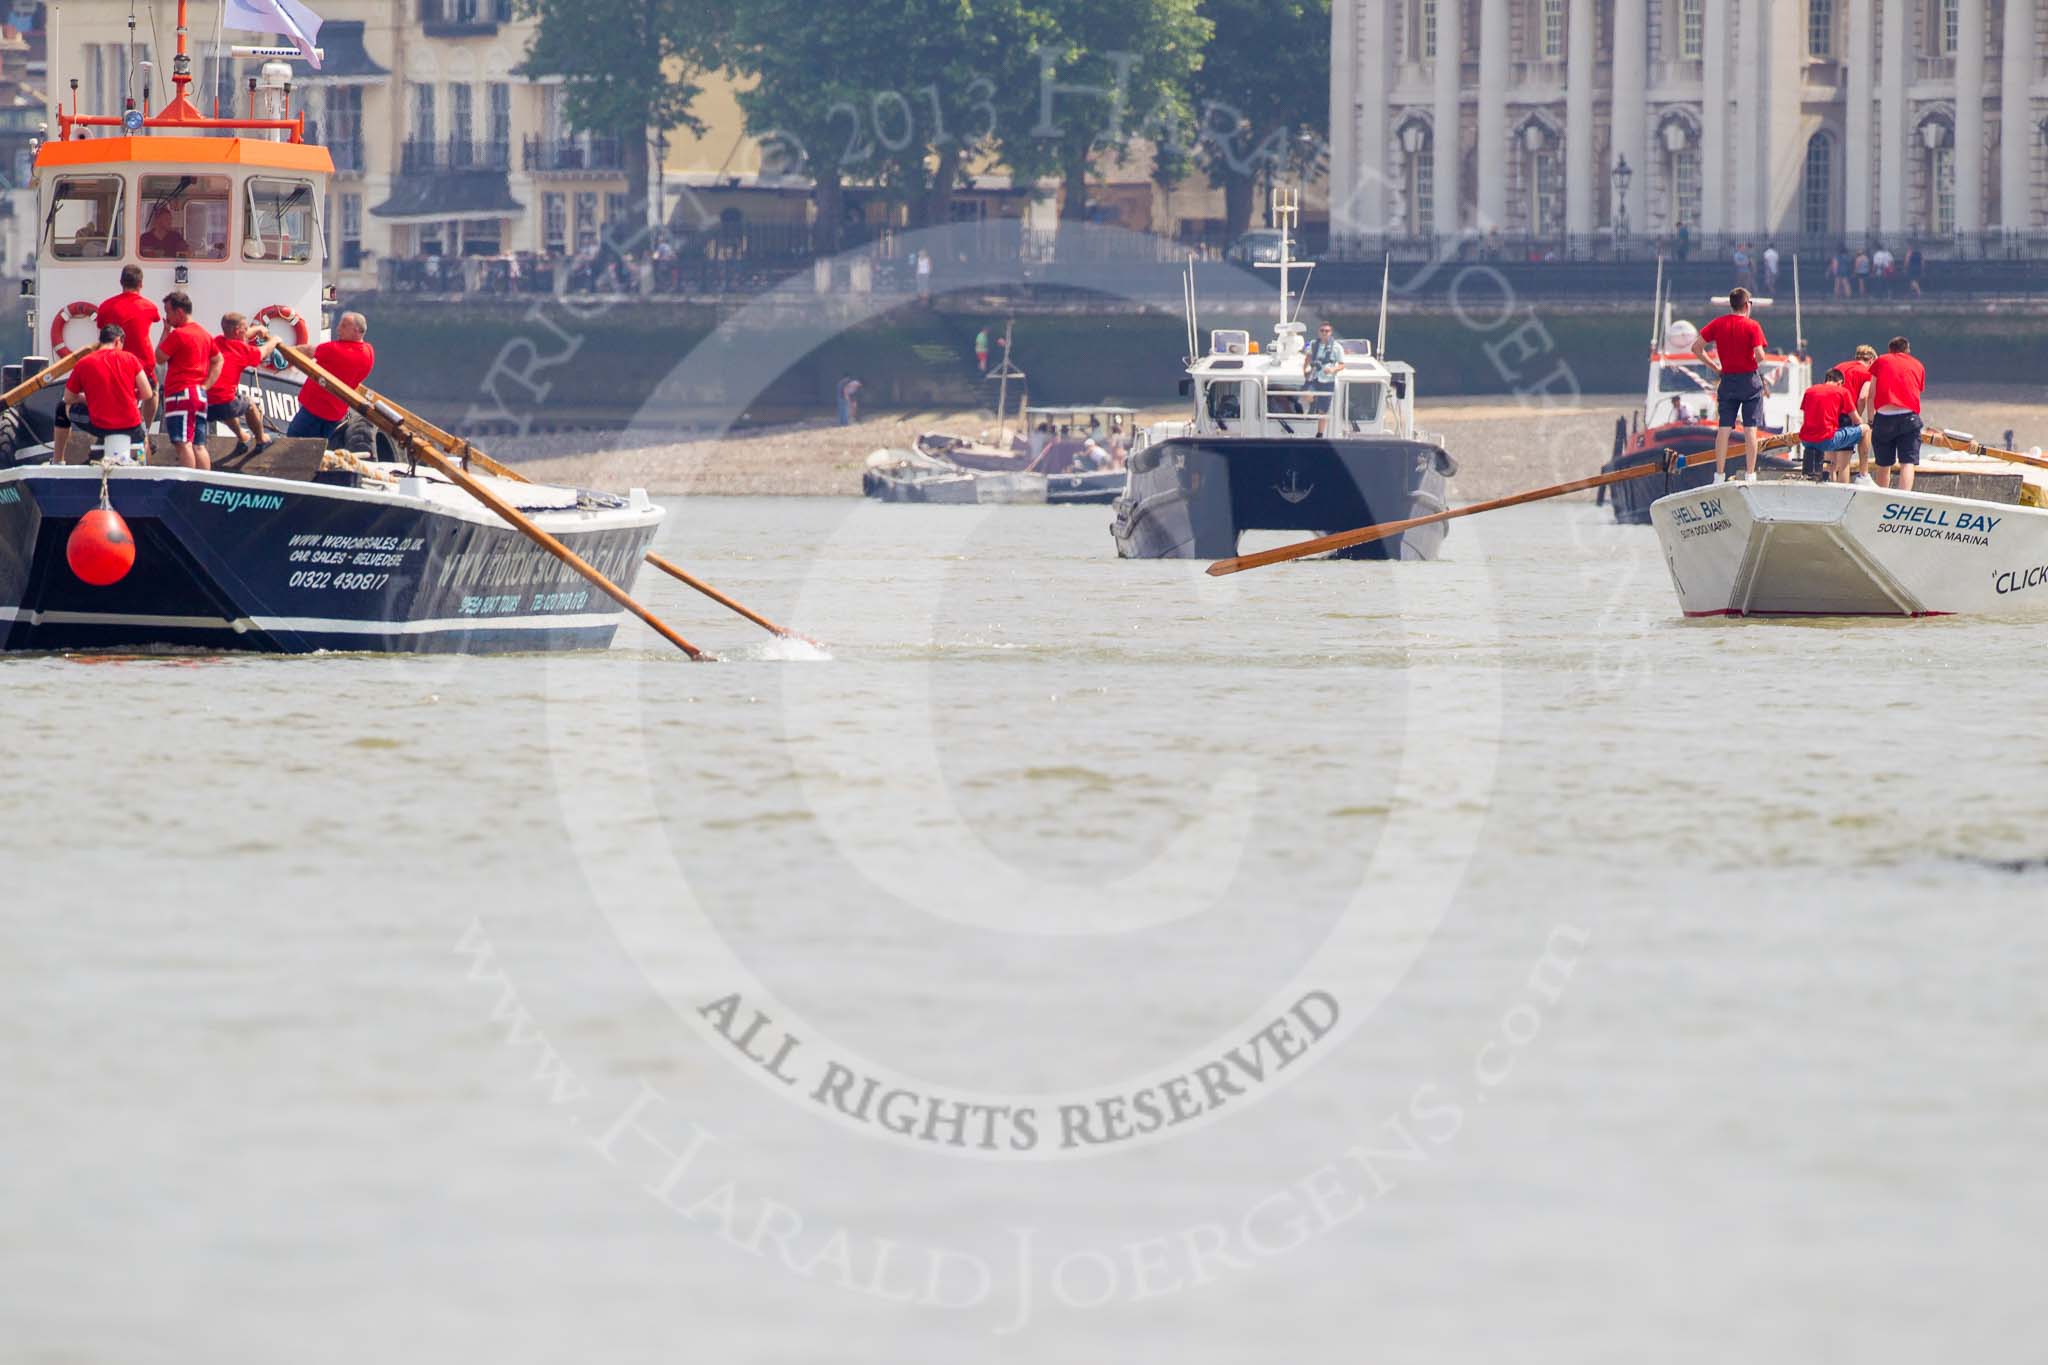 TOW River Thames Barge Driving Race 2013: On the left barge "Benjamin", by London Party Boats, followed by GPS Marine tug "GPS India", on the right barge "Shell Bay" by South Dock Marina..
River Thames between Greenwich and Westminster,
London,

United Kingdom,
on 13 July 2013 at 12:45, image #196